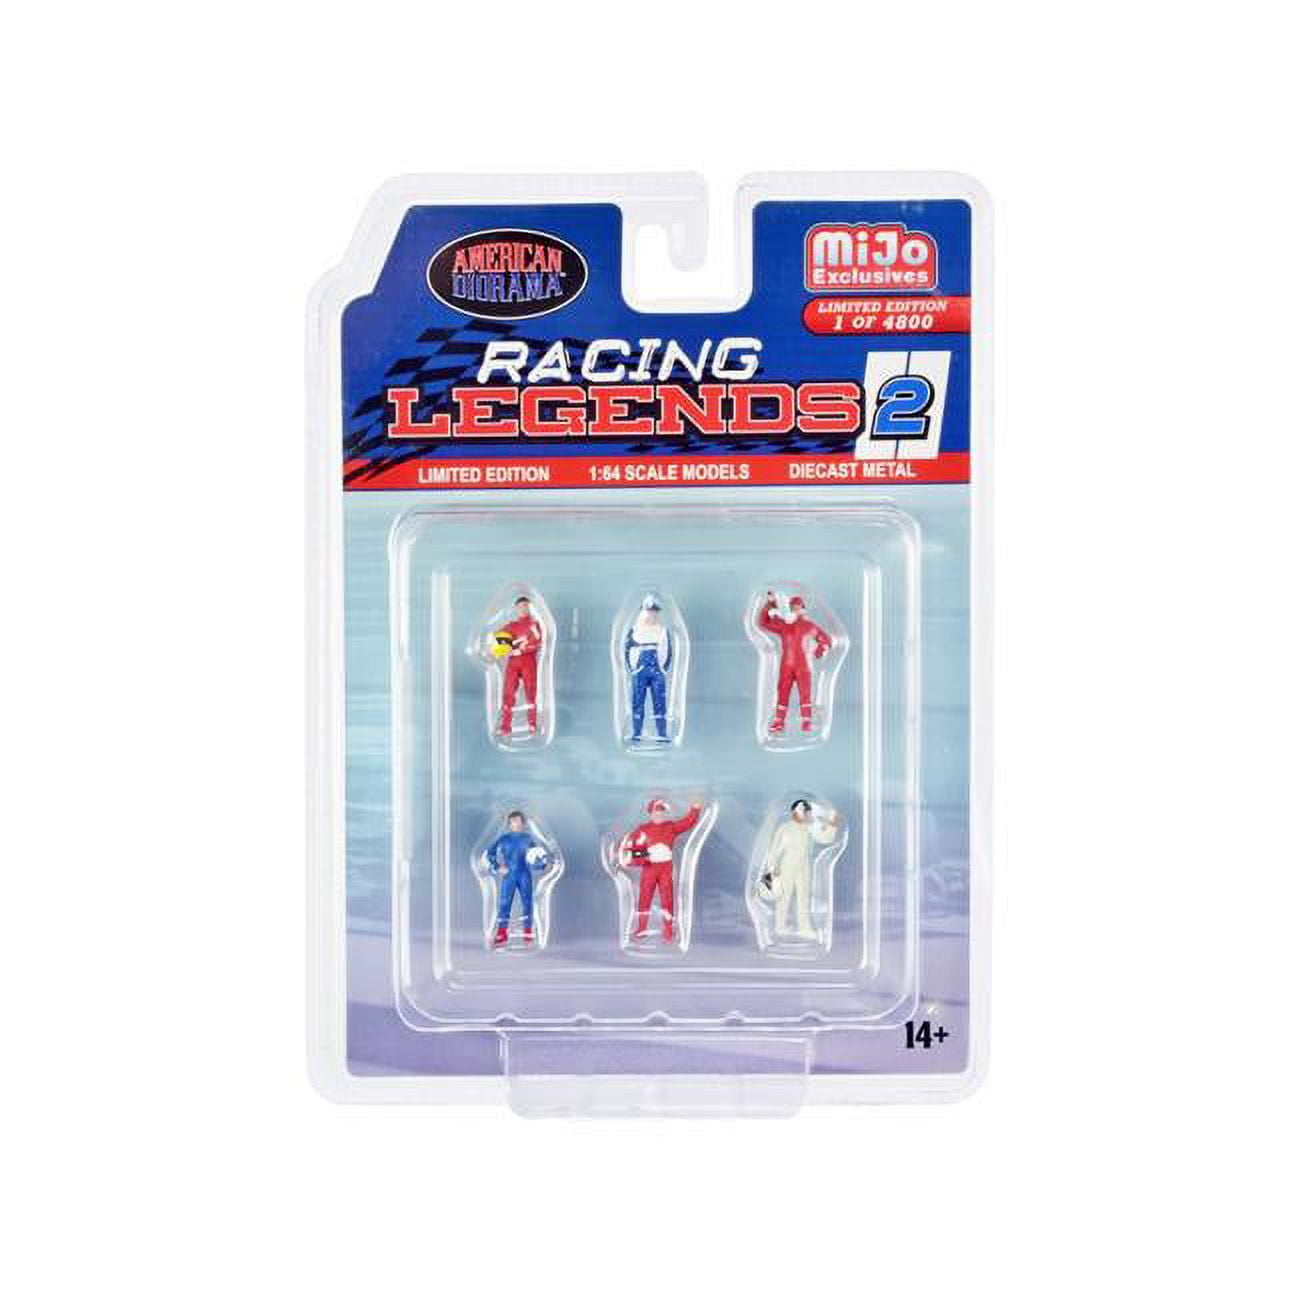 Picture of American Diorama AD-76511MJ Racing Legends 2 Diecast Driver Limited Edition to Worldwide for 1 by 64 Scale Models Figures - 6 Piece - 4800 Piece- Set of 6